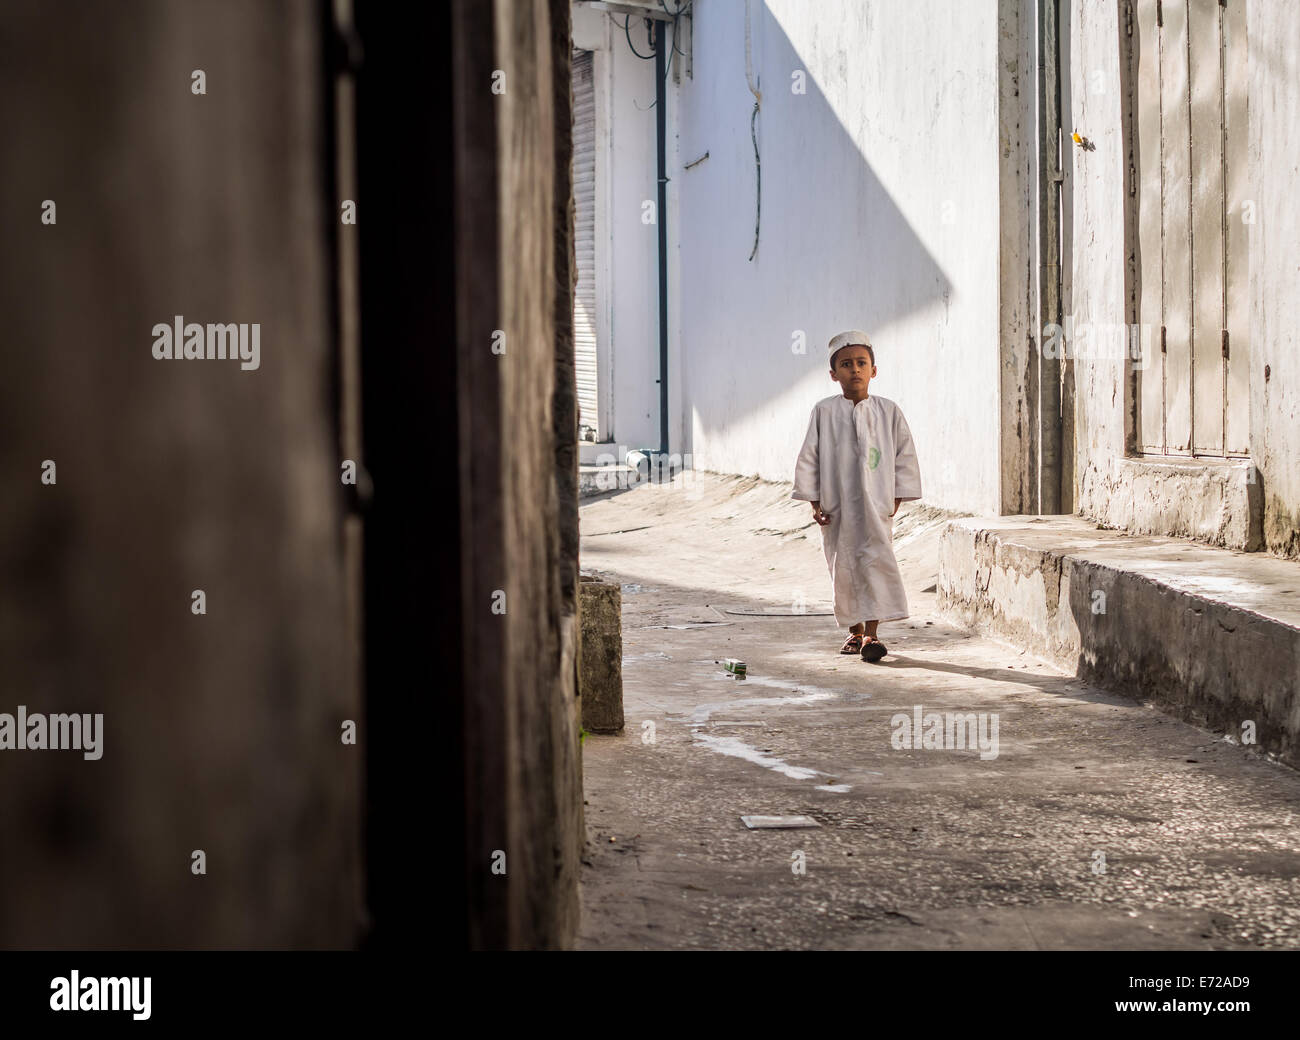 A schoolboy in his uniform on one of the streets of Stone Town on Zanzibar island. Stock Photo